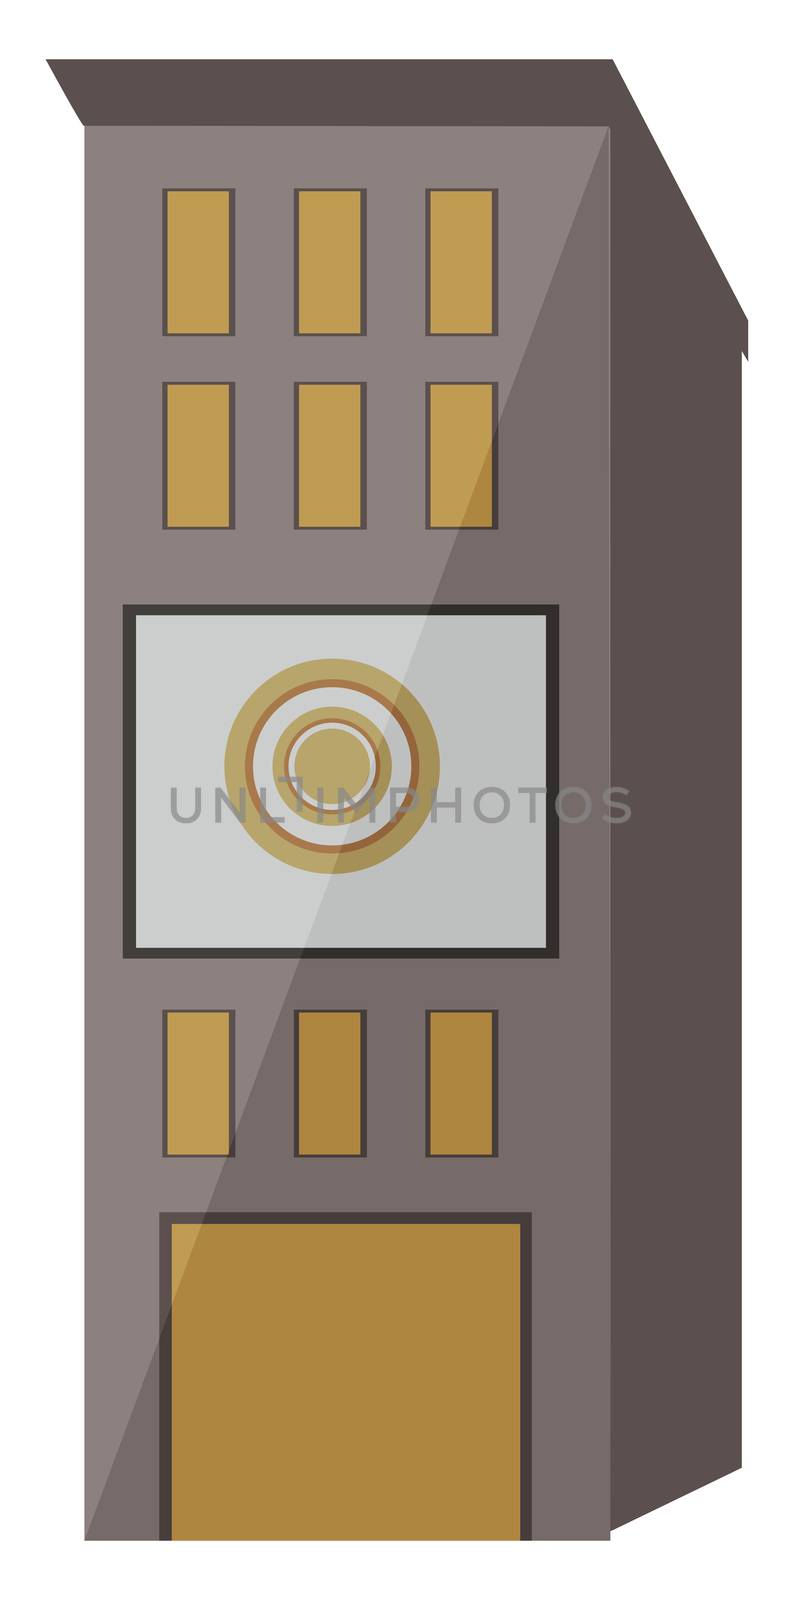 Tall building, illustration, vector on white background by Morphart